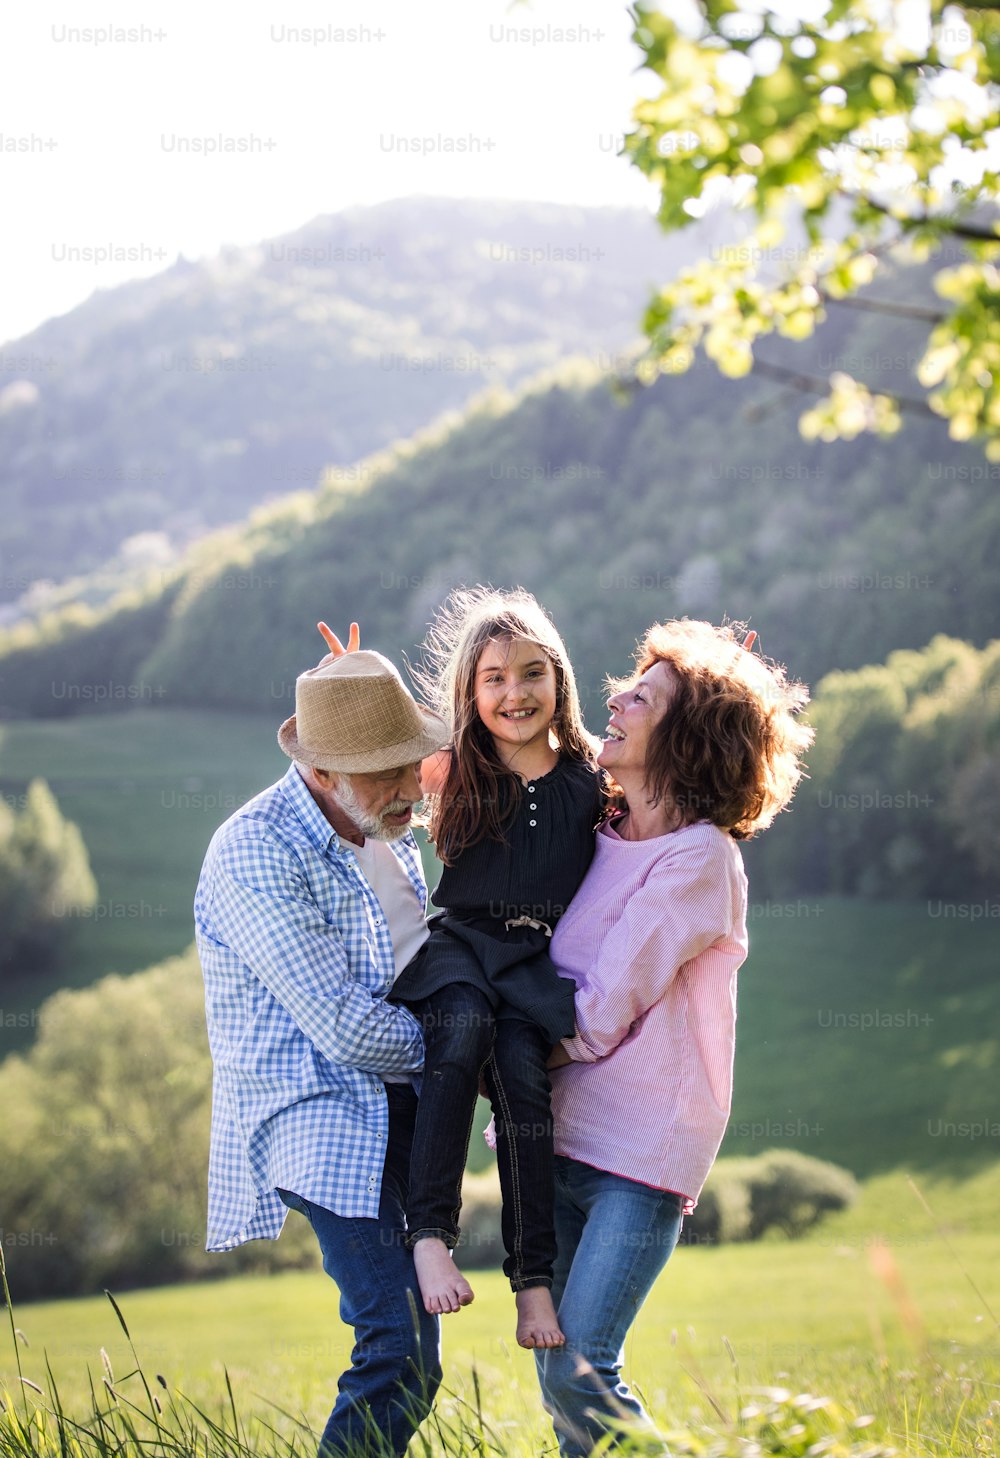 Cheerful senior couple with granddaughter outside in spring nature, relaxing and having fun.